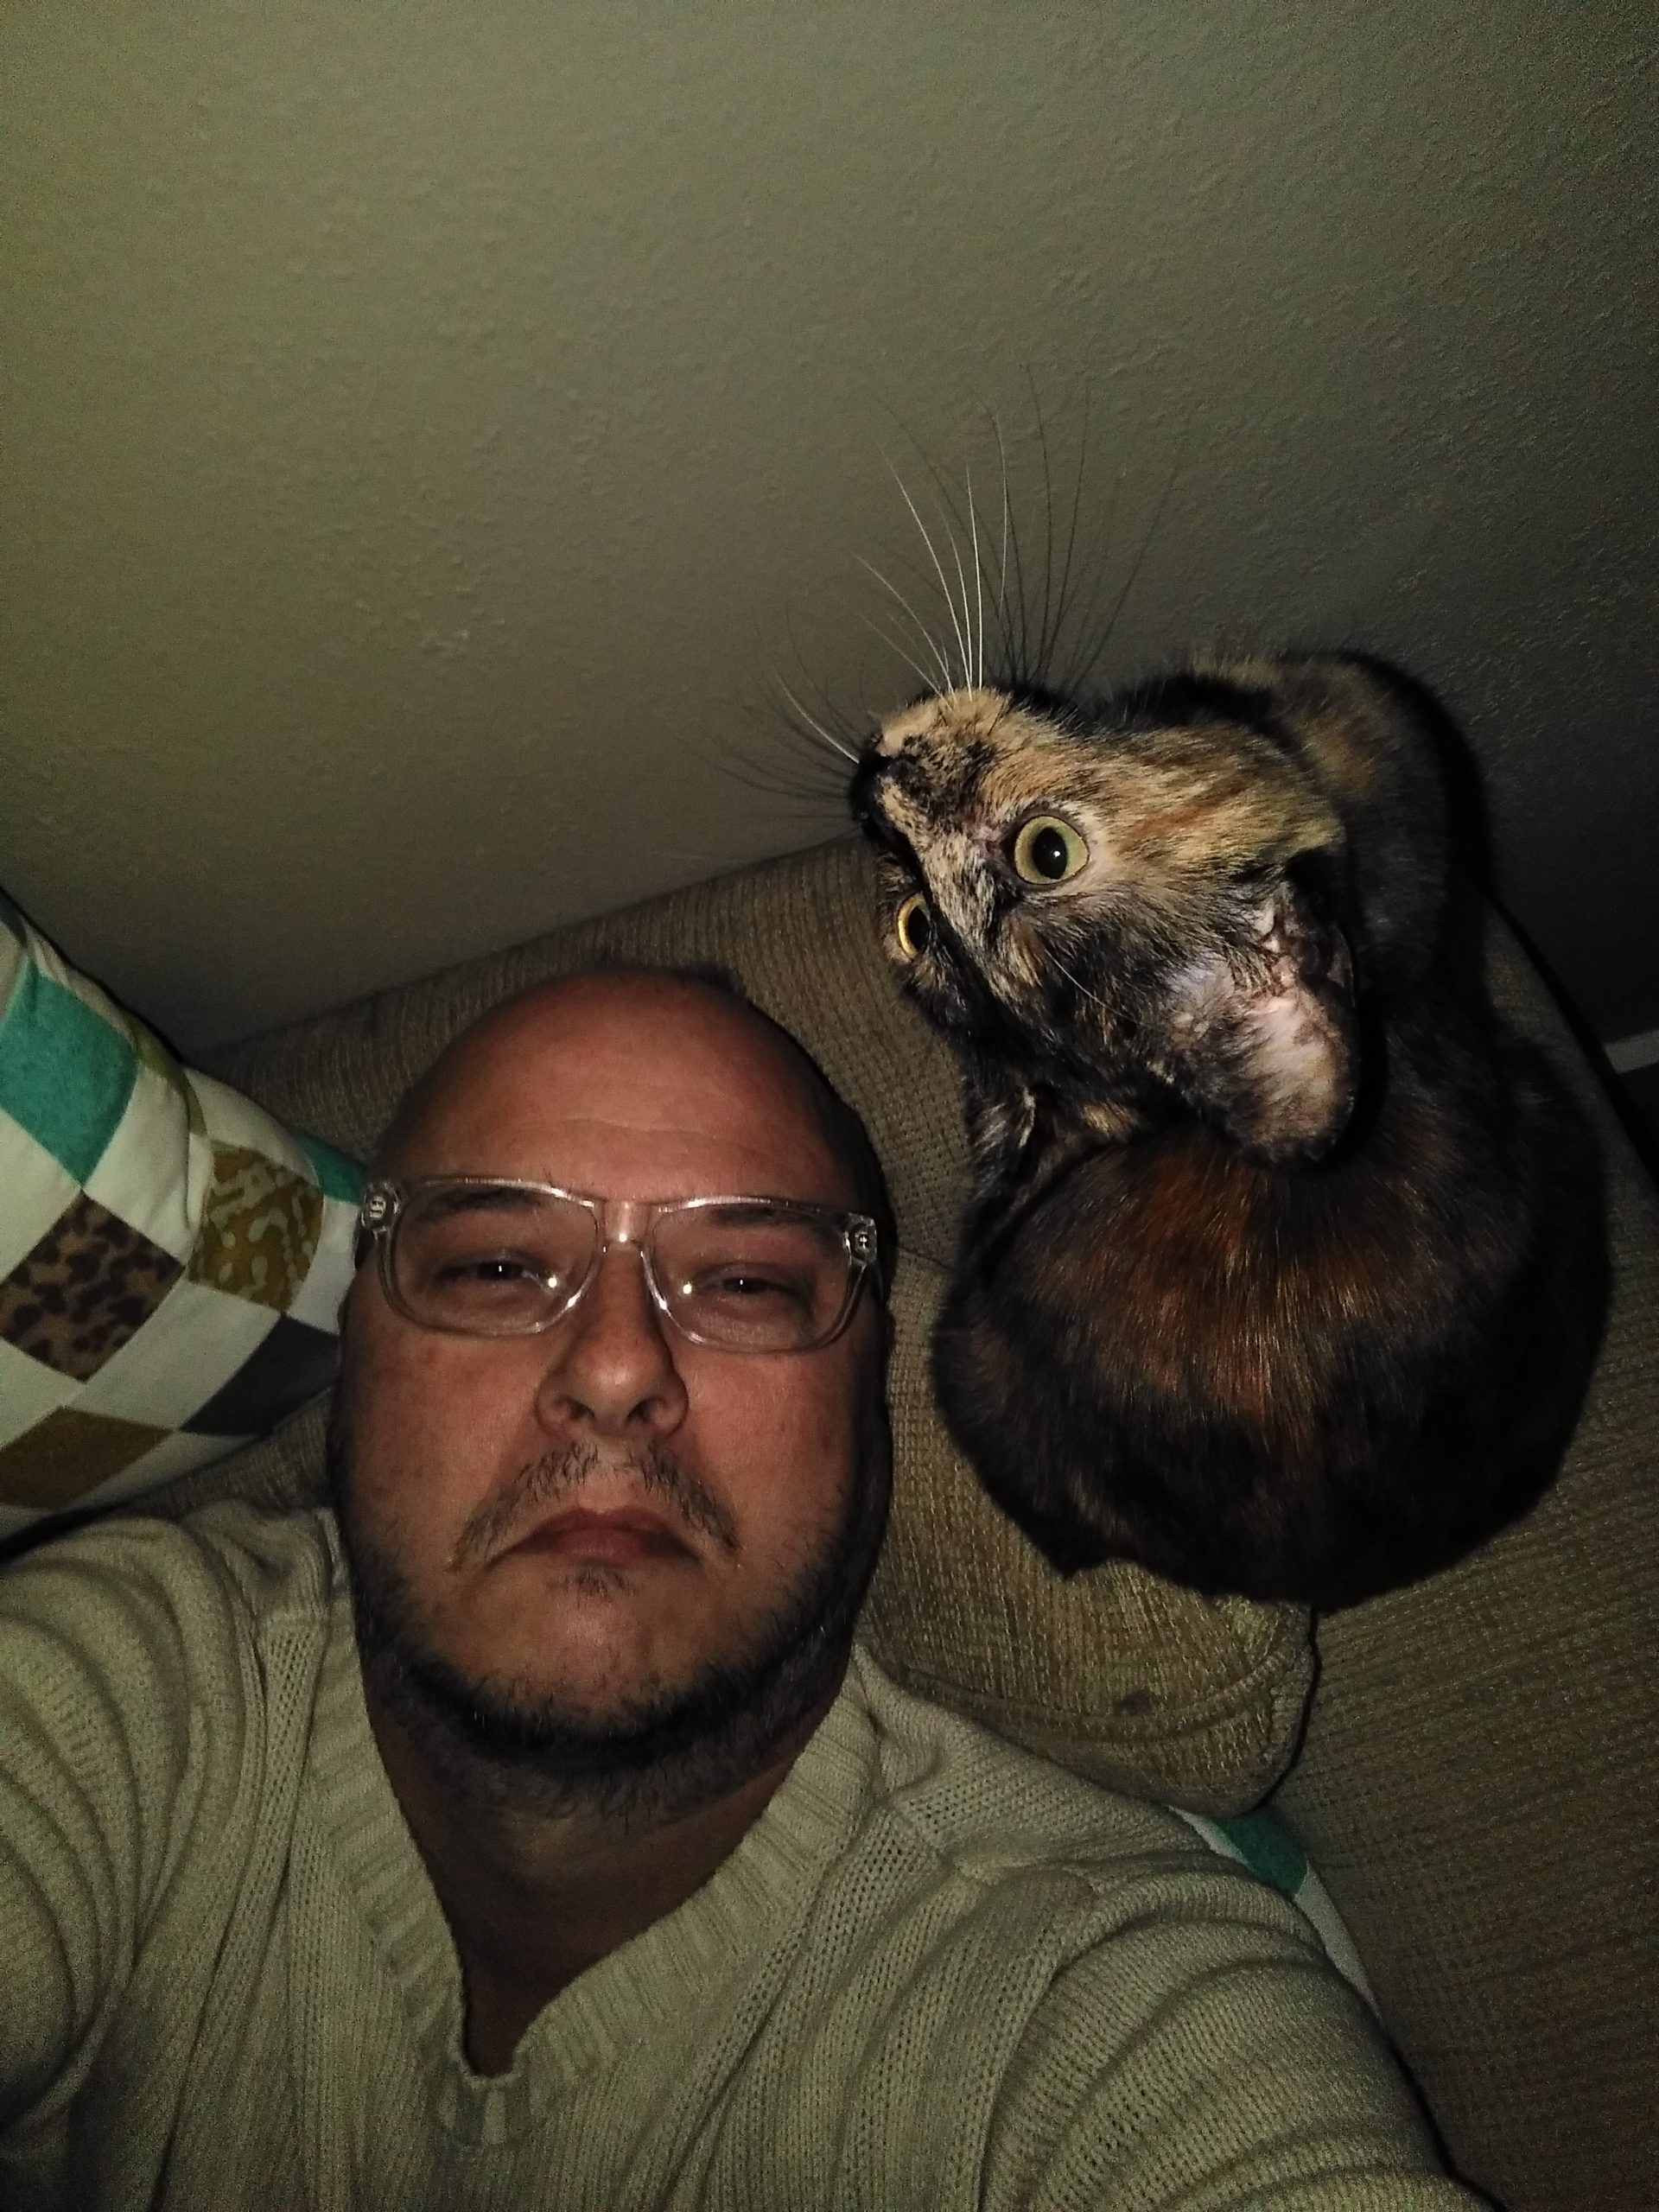 Sitting in a comfy chair, and taking a selfie with me and a tortiseshell cat who is sitting near my left shoulder.